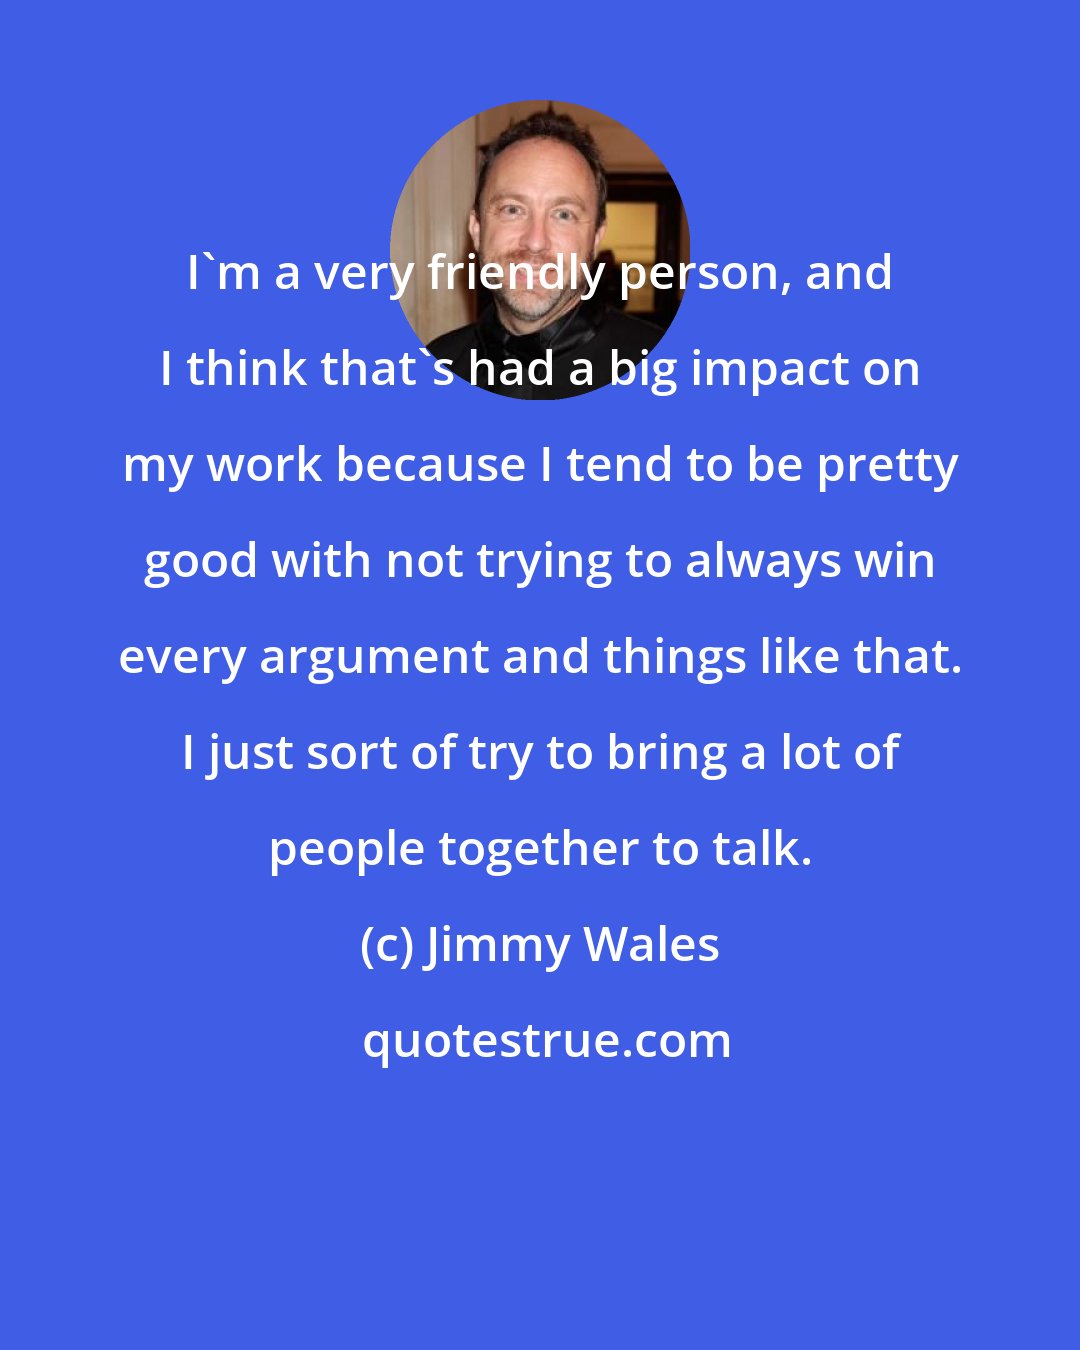 Jimmy Wales: I'm a very friendly person, and I think that's had a big impact on my work because I tend to be pretty good with not trying to always win every argument and things like that. I just sort of try to bring a lot of people together to talk.